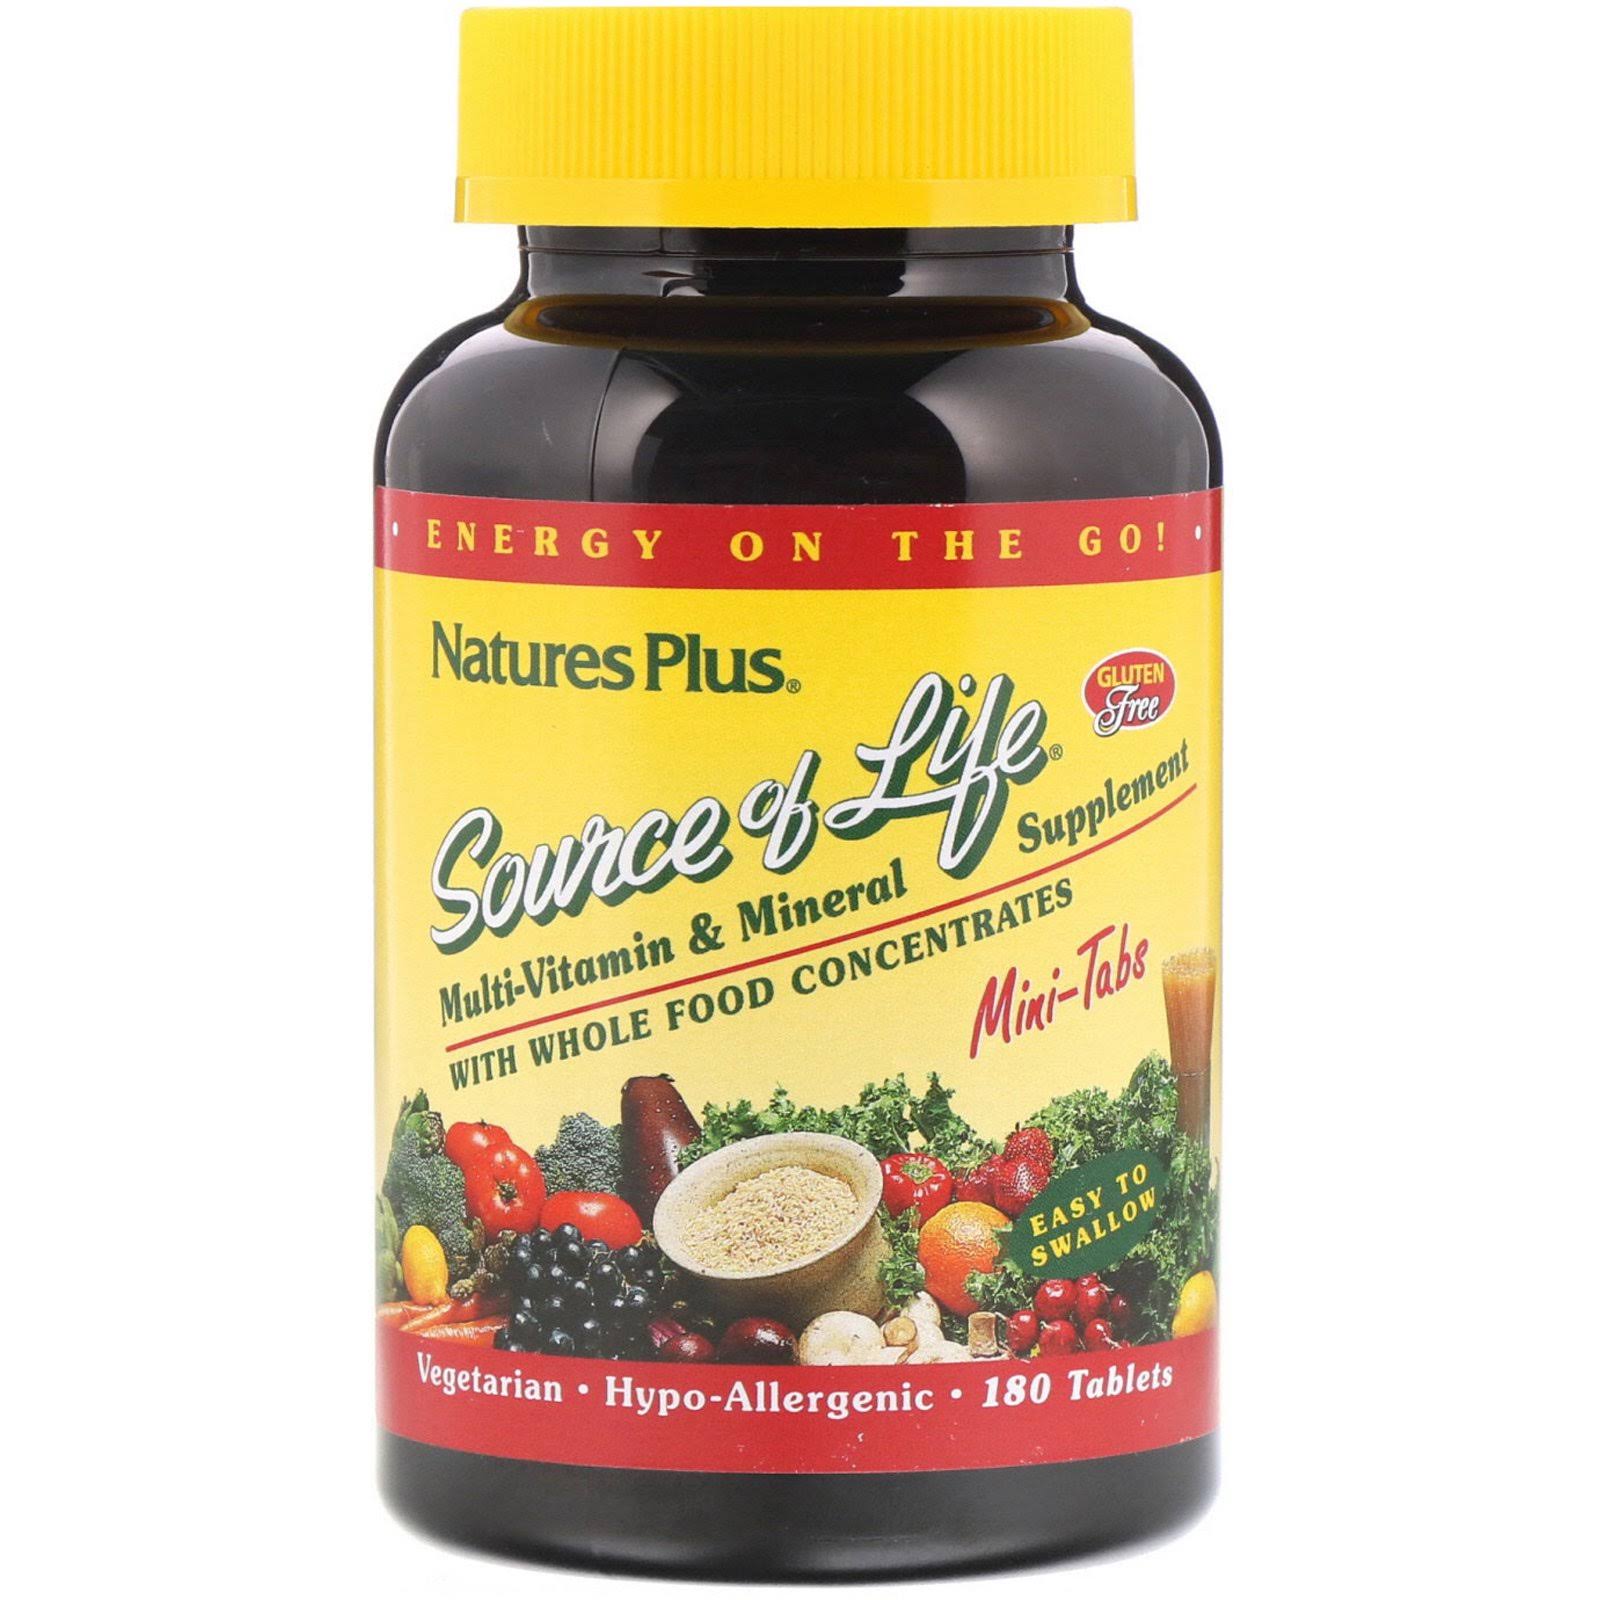 Nature's Plus Source of Life Multi-vitamin & Mineral Supplement - 180 Tablets